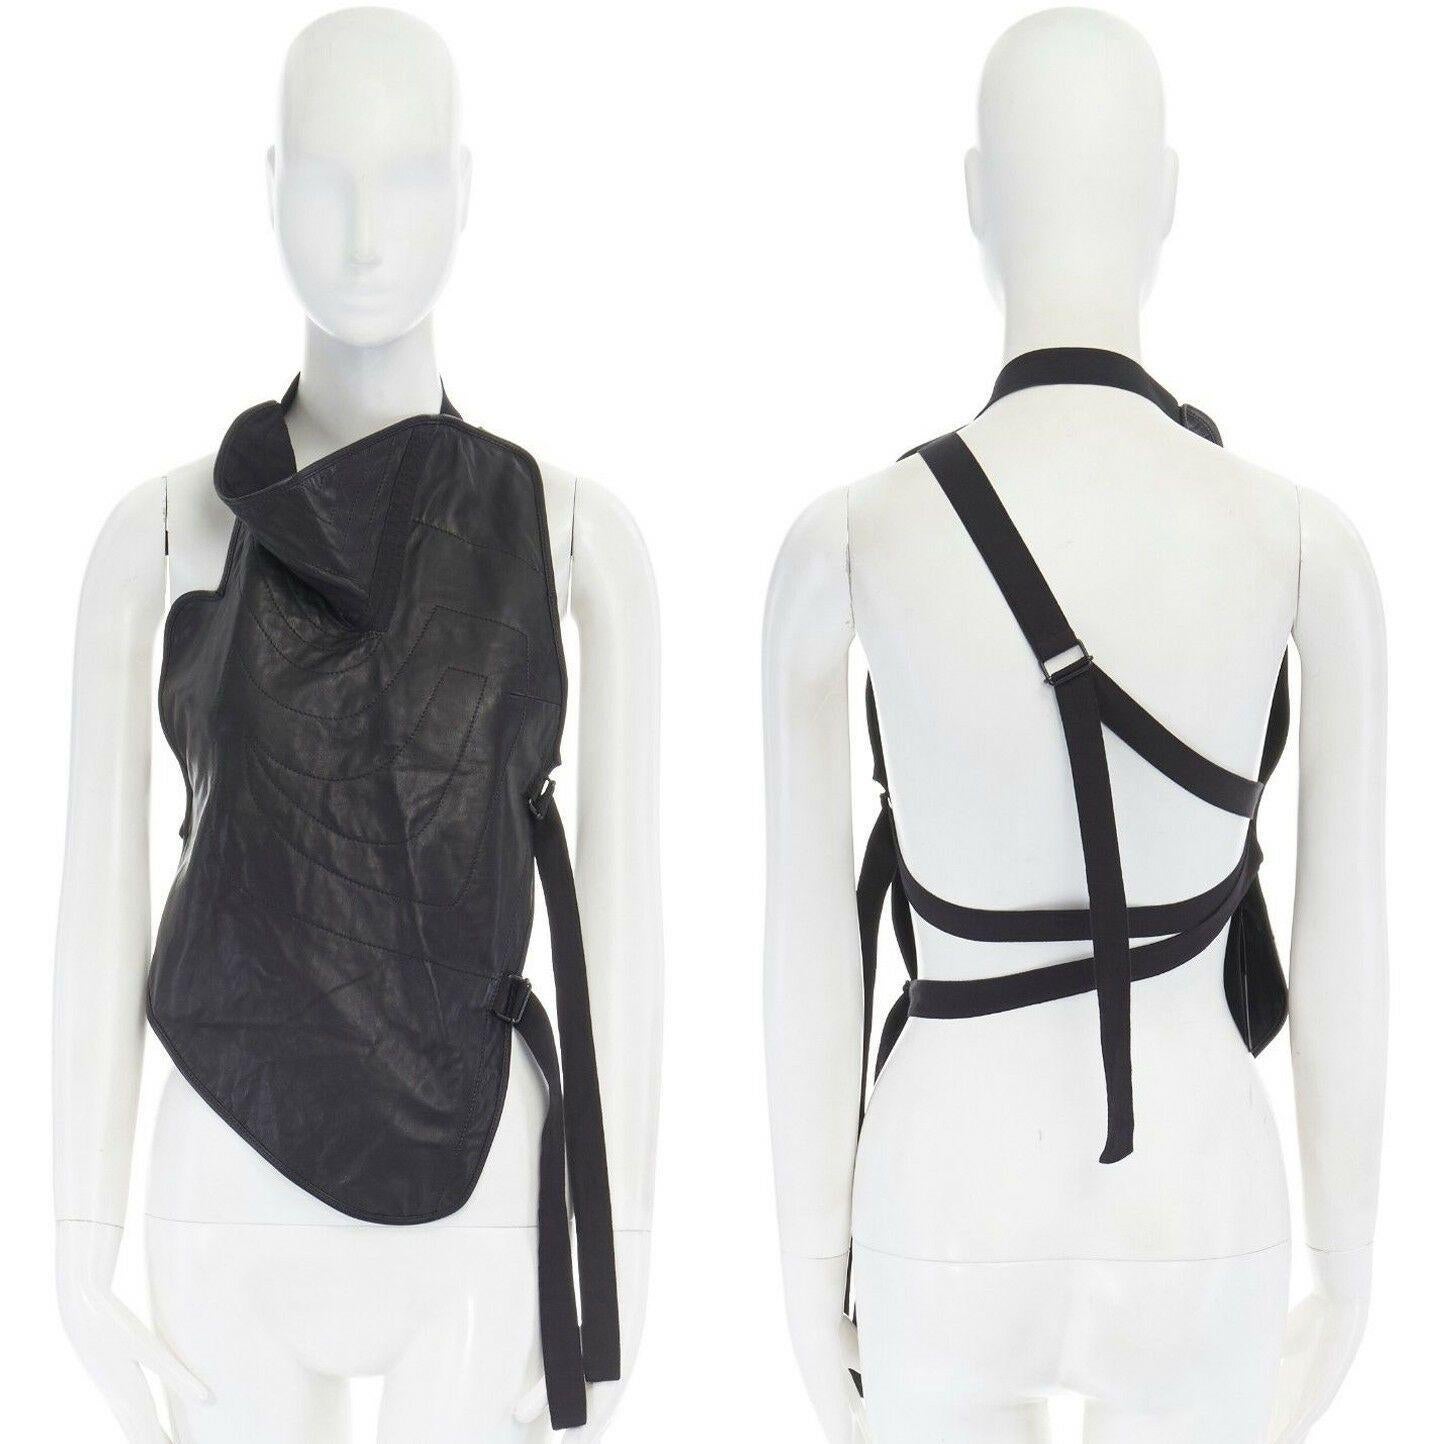 new ANN DEMEULEMEESTER black leather draped neck stitch strappy harness top M
ANN DEMEULEMEESTER
Black leather. Draped neckline. Tonal stitching detail. Sleeveless. 
Front patch vest design. Cotton and D-ring multi-strap bondage back. 
Fully lined